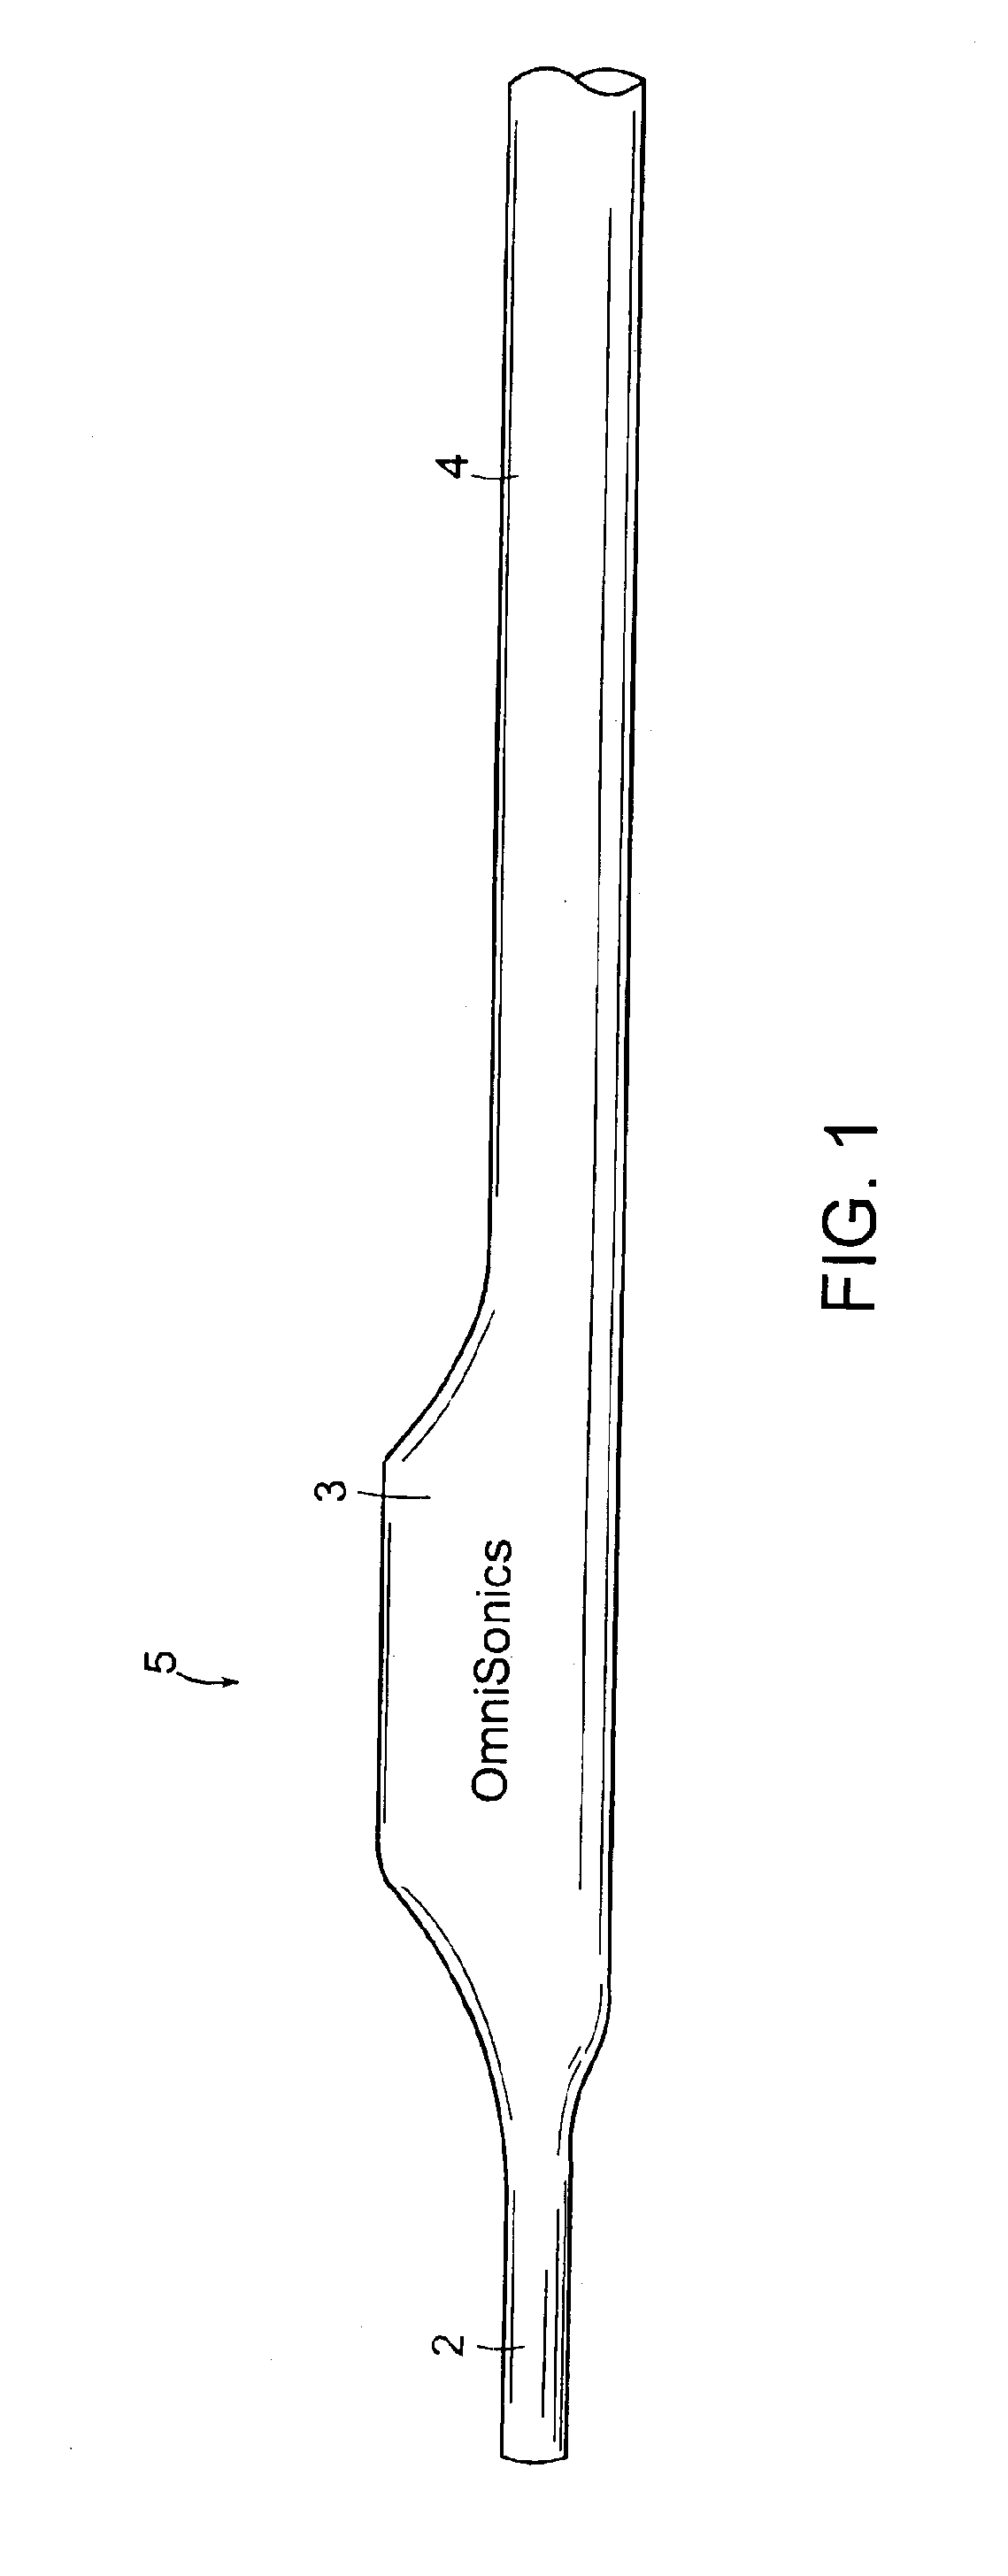 Apparatus for removing plaque from blood vessels using ultrasonic energy